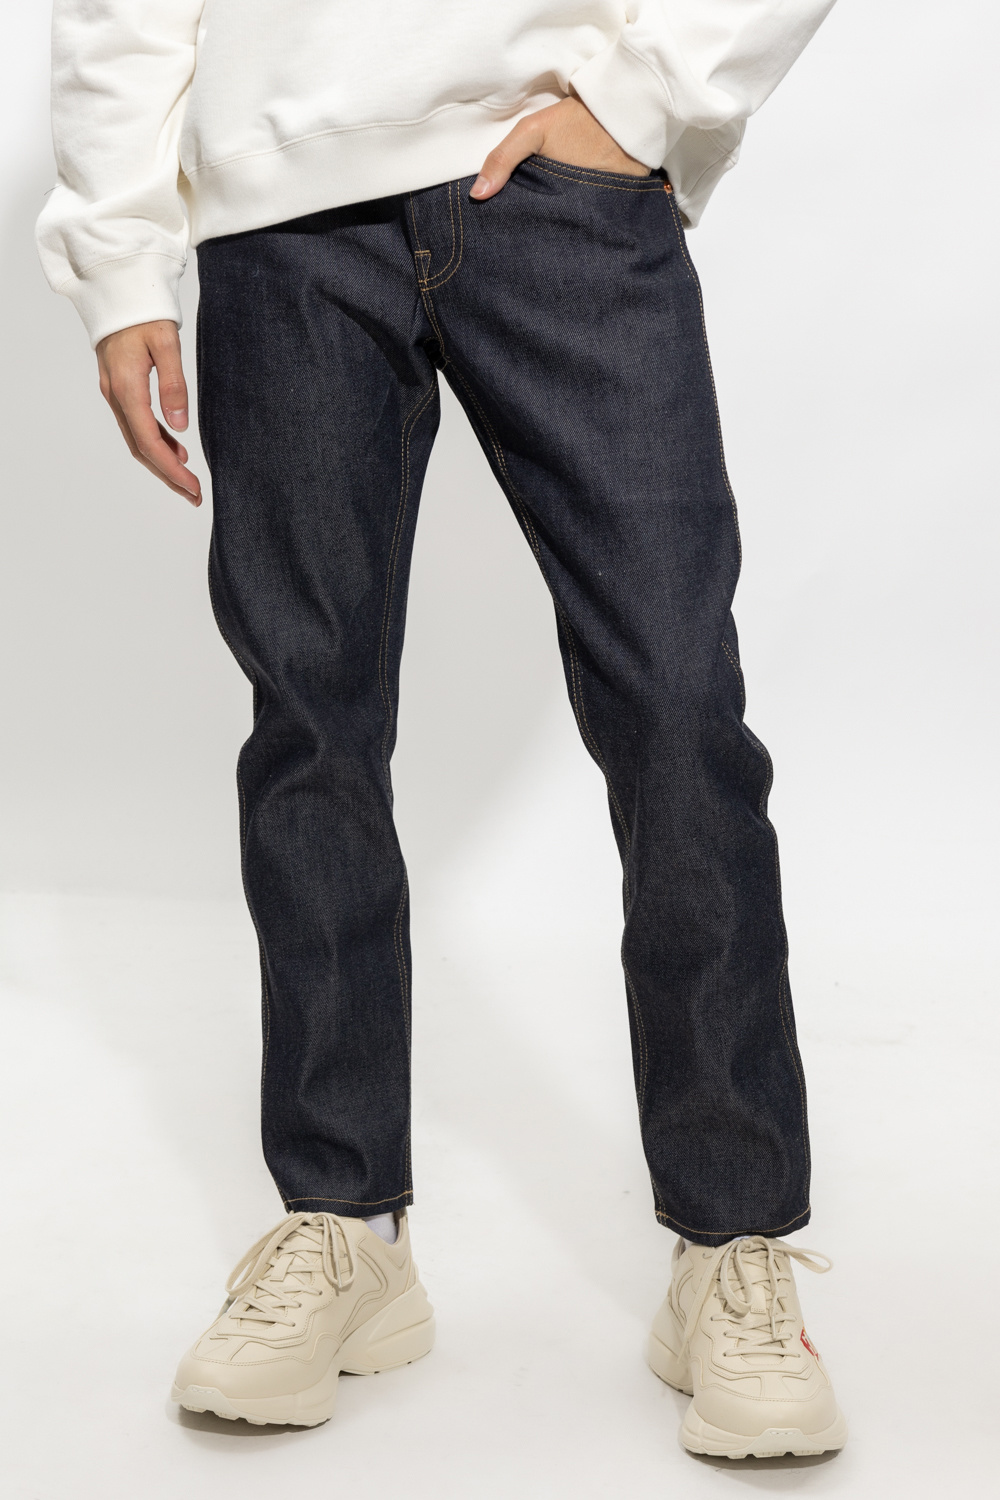 Gucci Tapered jeans